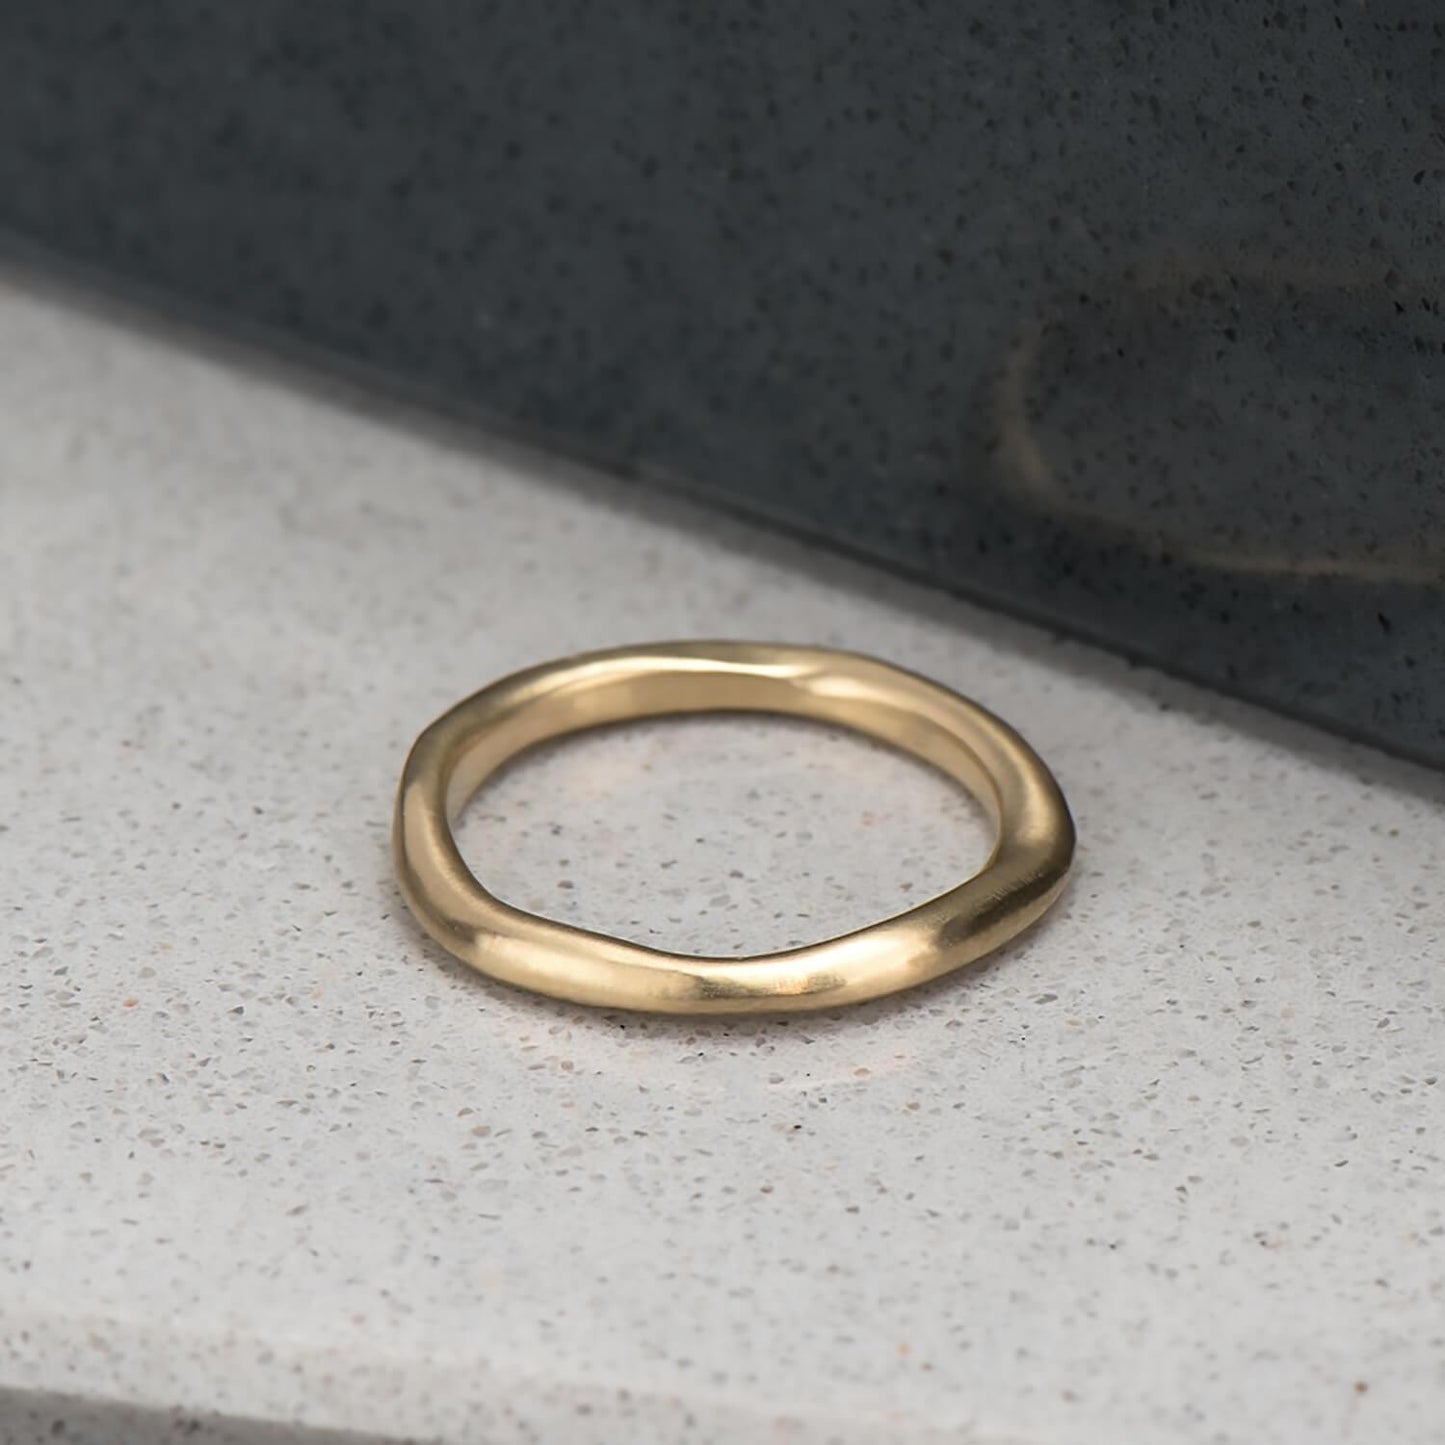 Organic, irregular shaped ring in 10 karat recycled yellow gold with a satin finish.